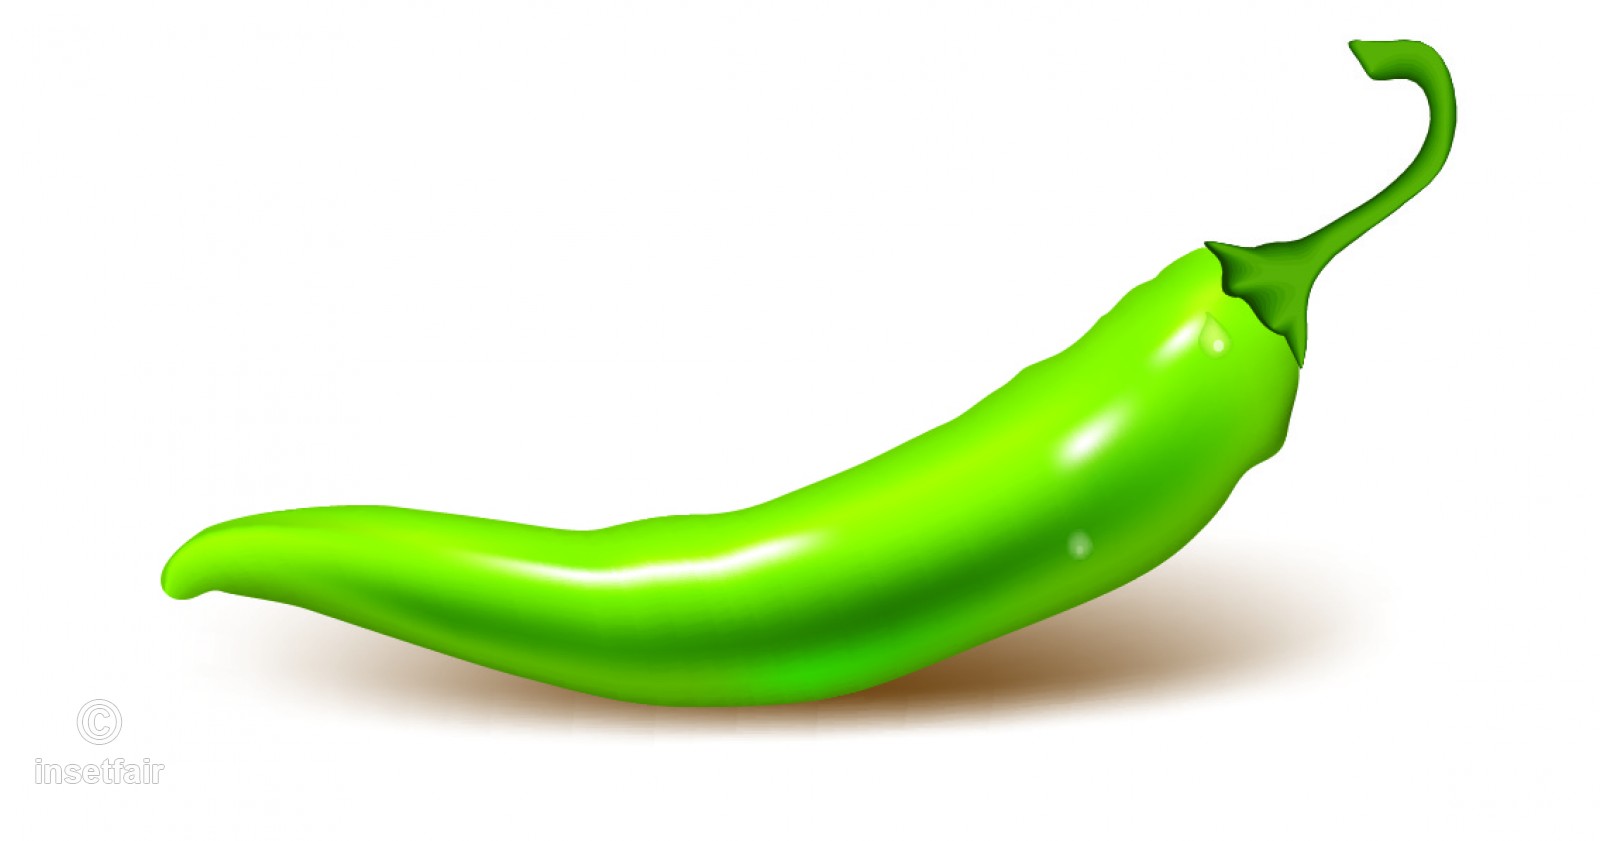 1600x841 Green Chili Pepper Vector Stock Png Image. 